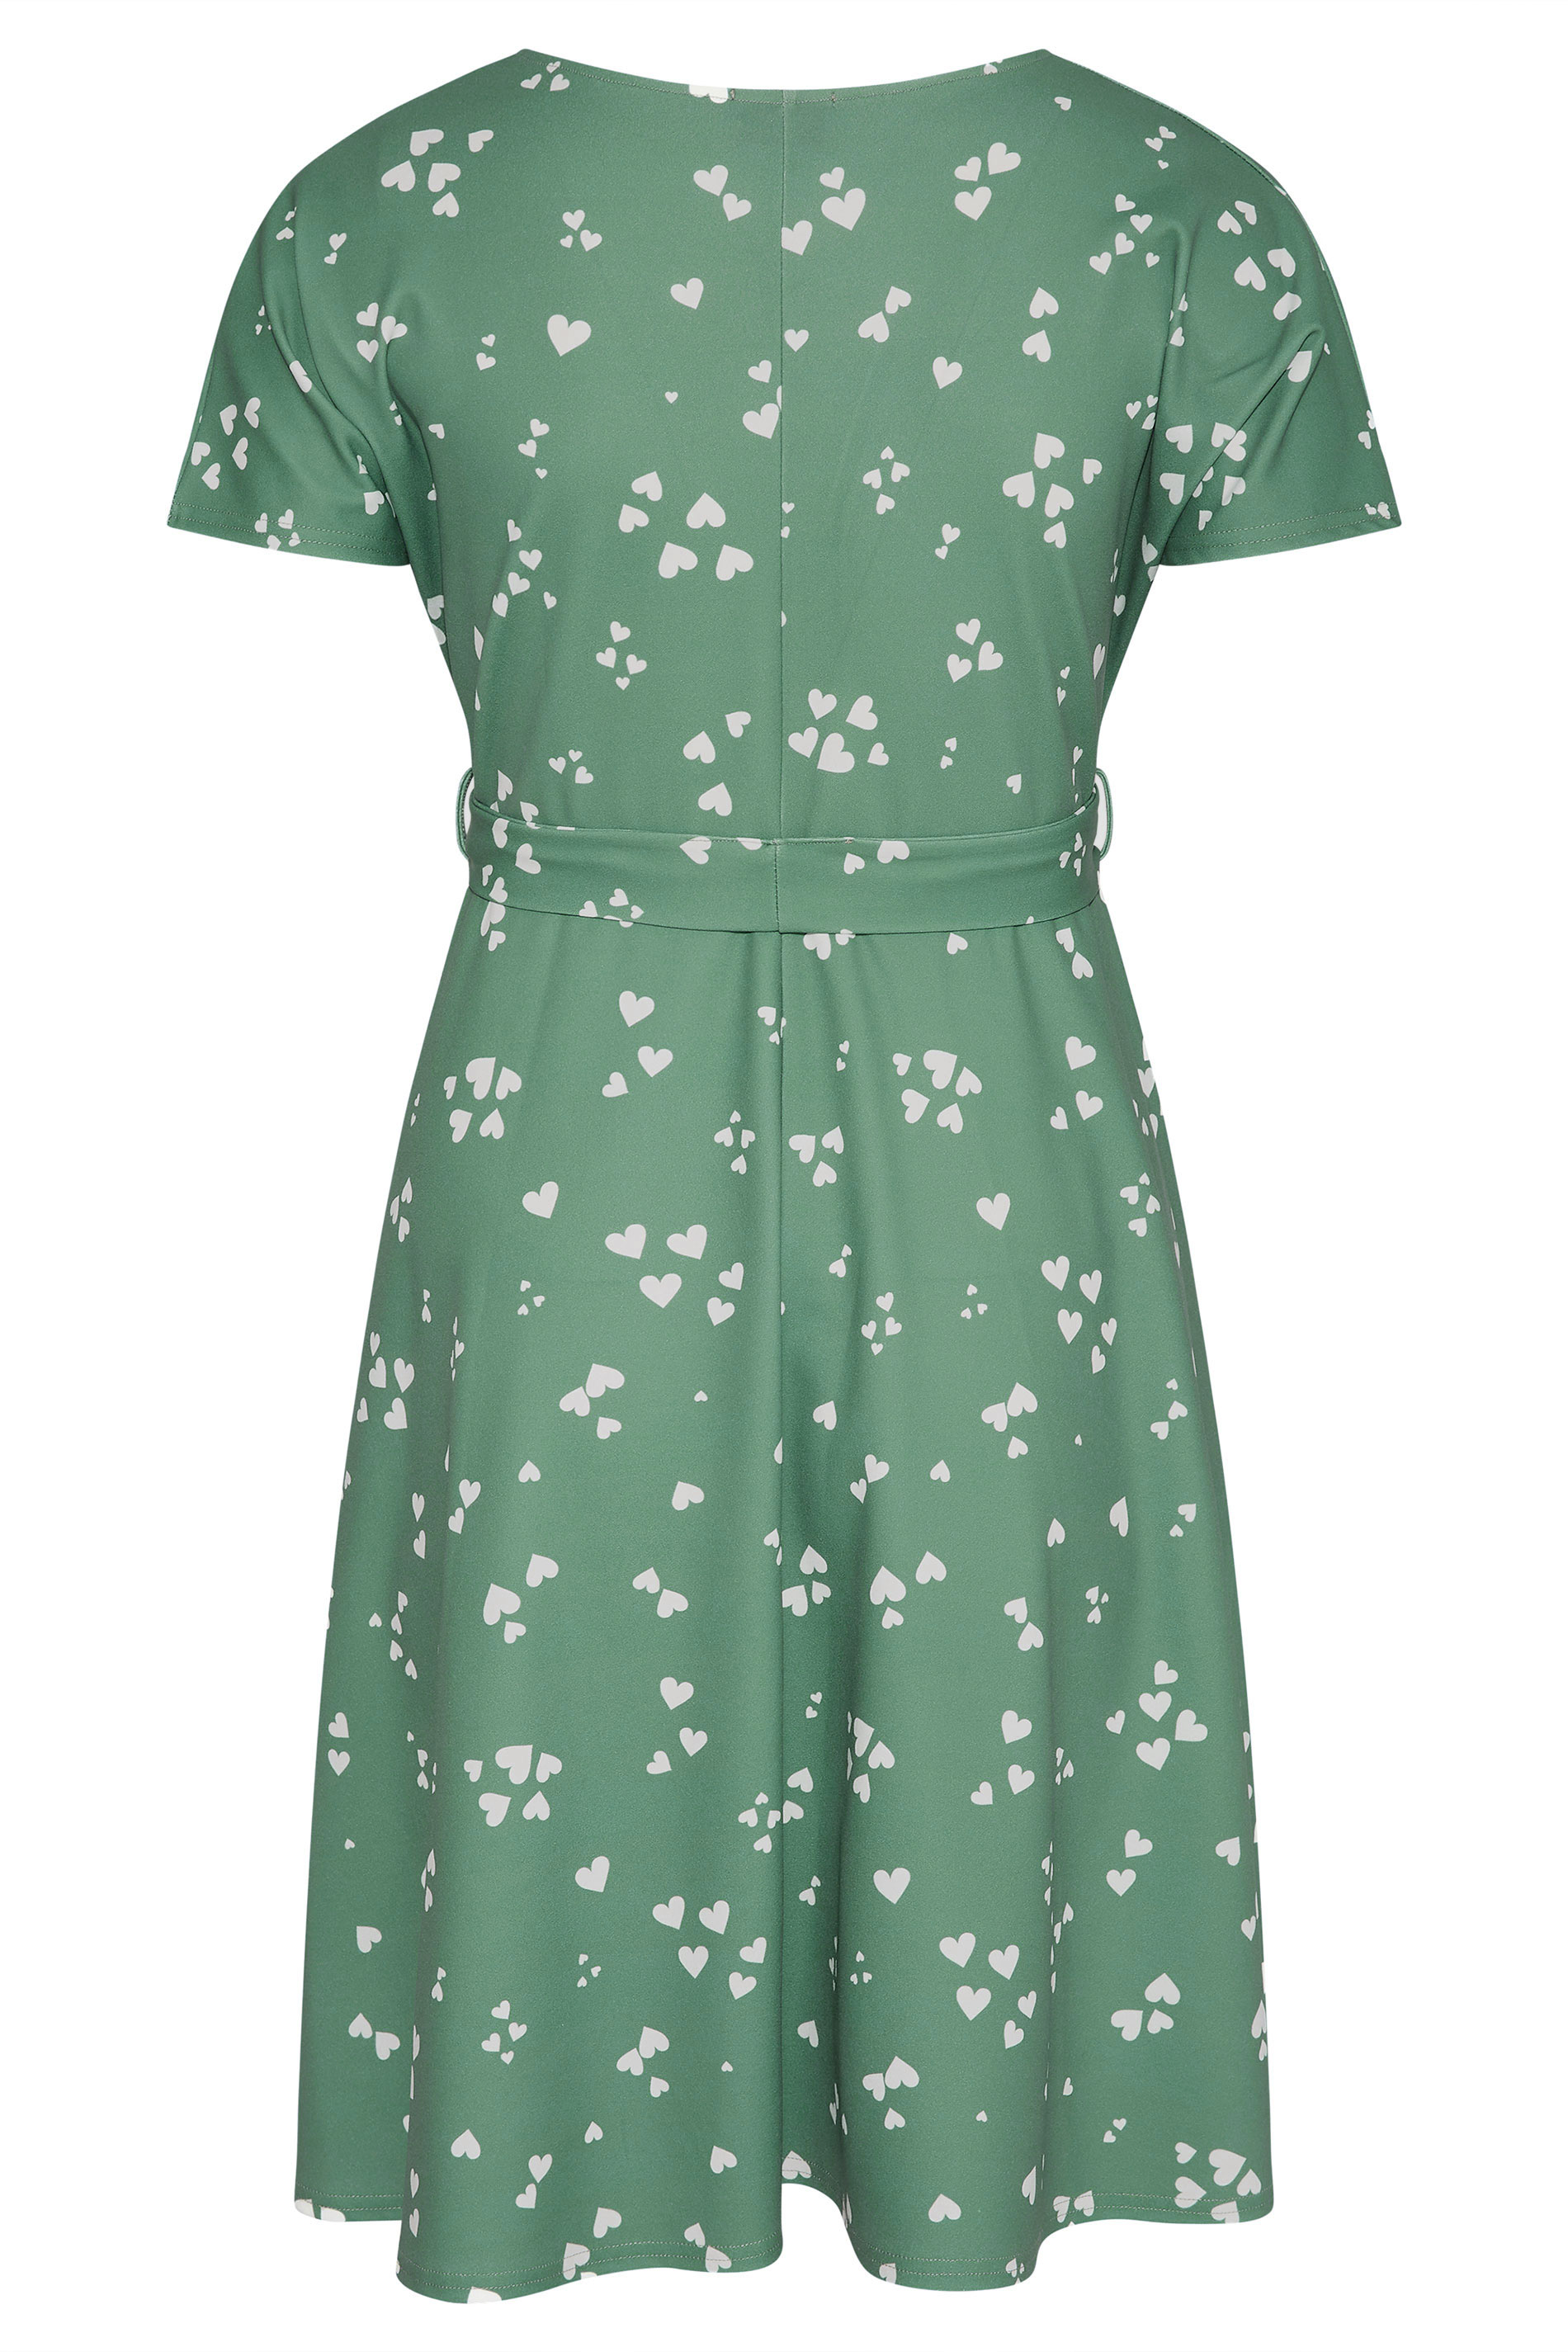 YOURS LONDON Plus Size Sage Green Heart ...